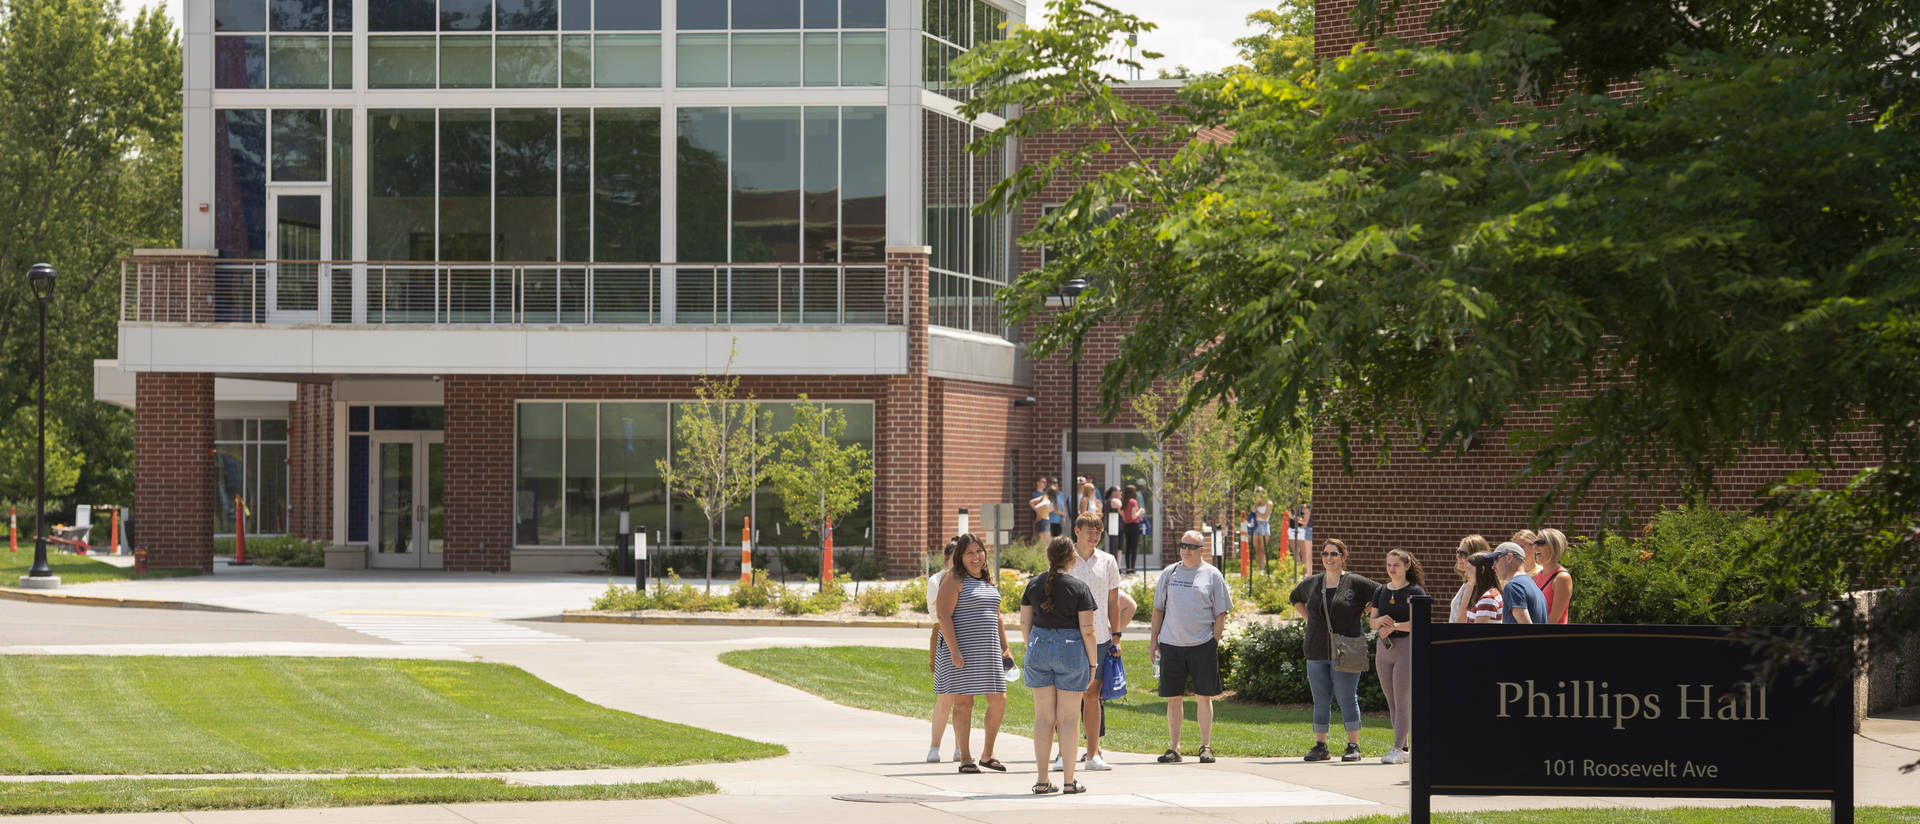 An Admissions tour walks past the Flesch Family Welcome Center on a summery day